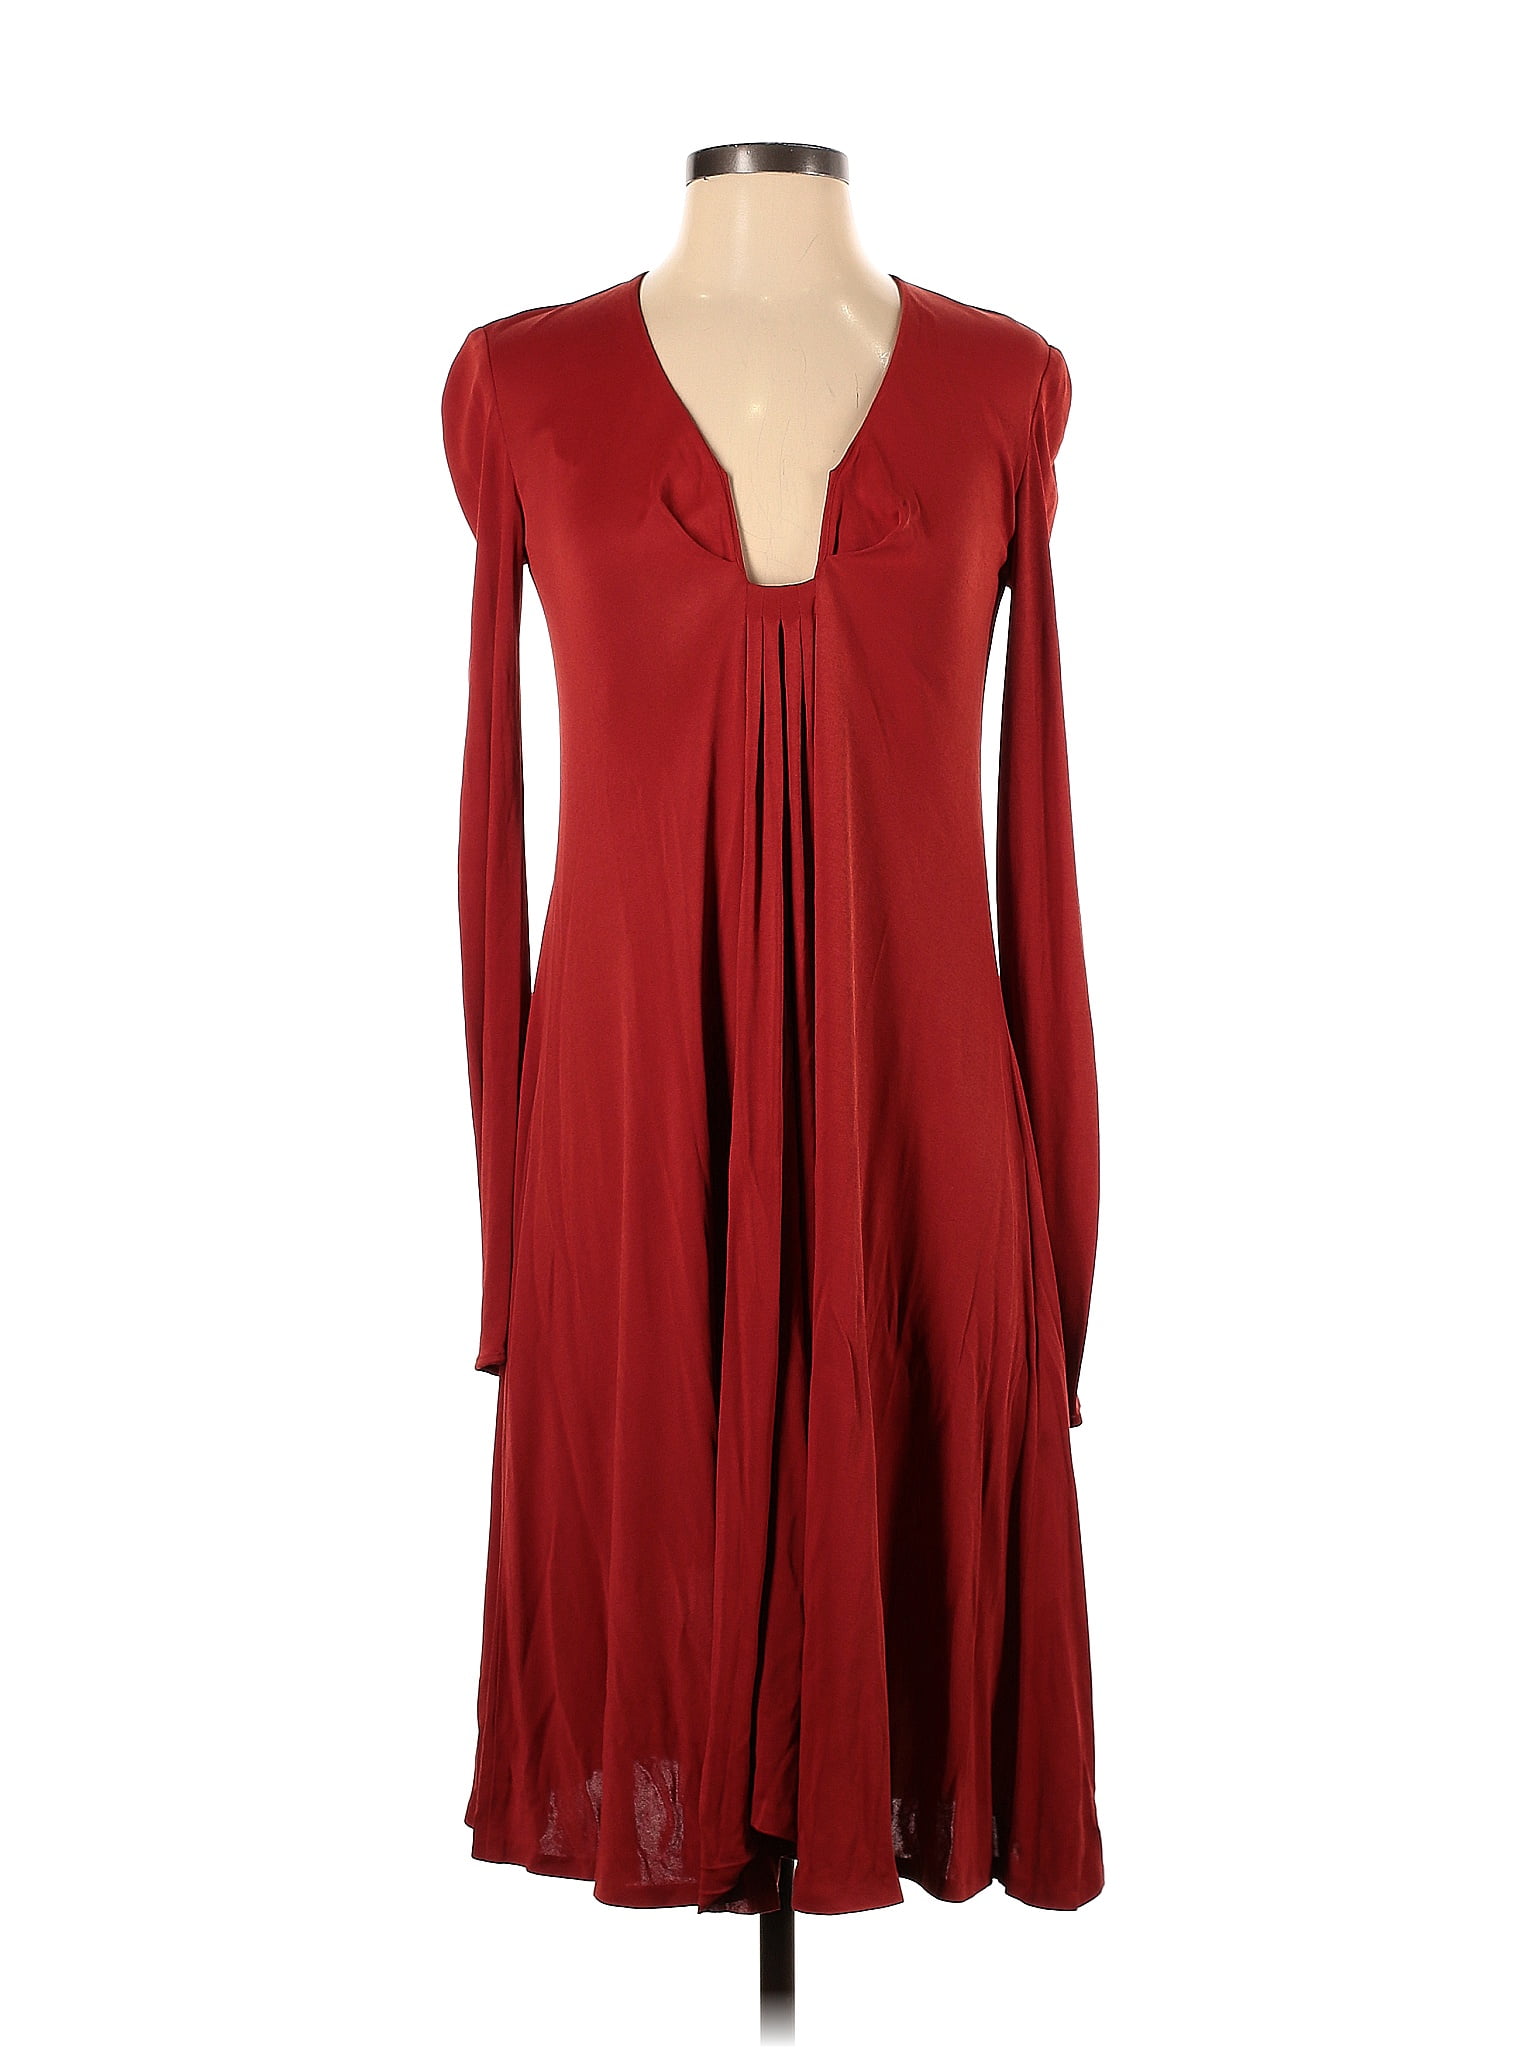 Gucci Solid Burgundy Casual Dress Size 40 (IT) - 90% off | thredUP